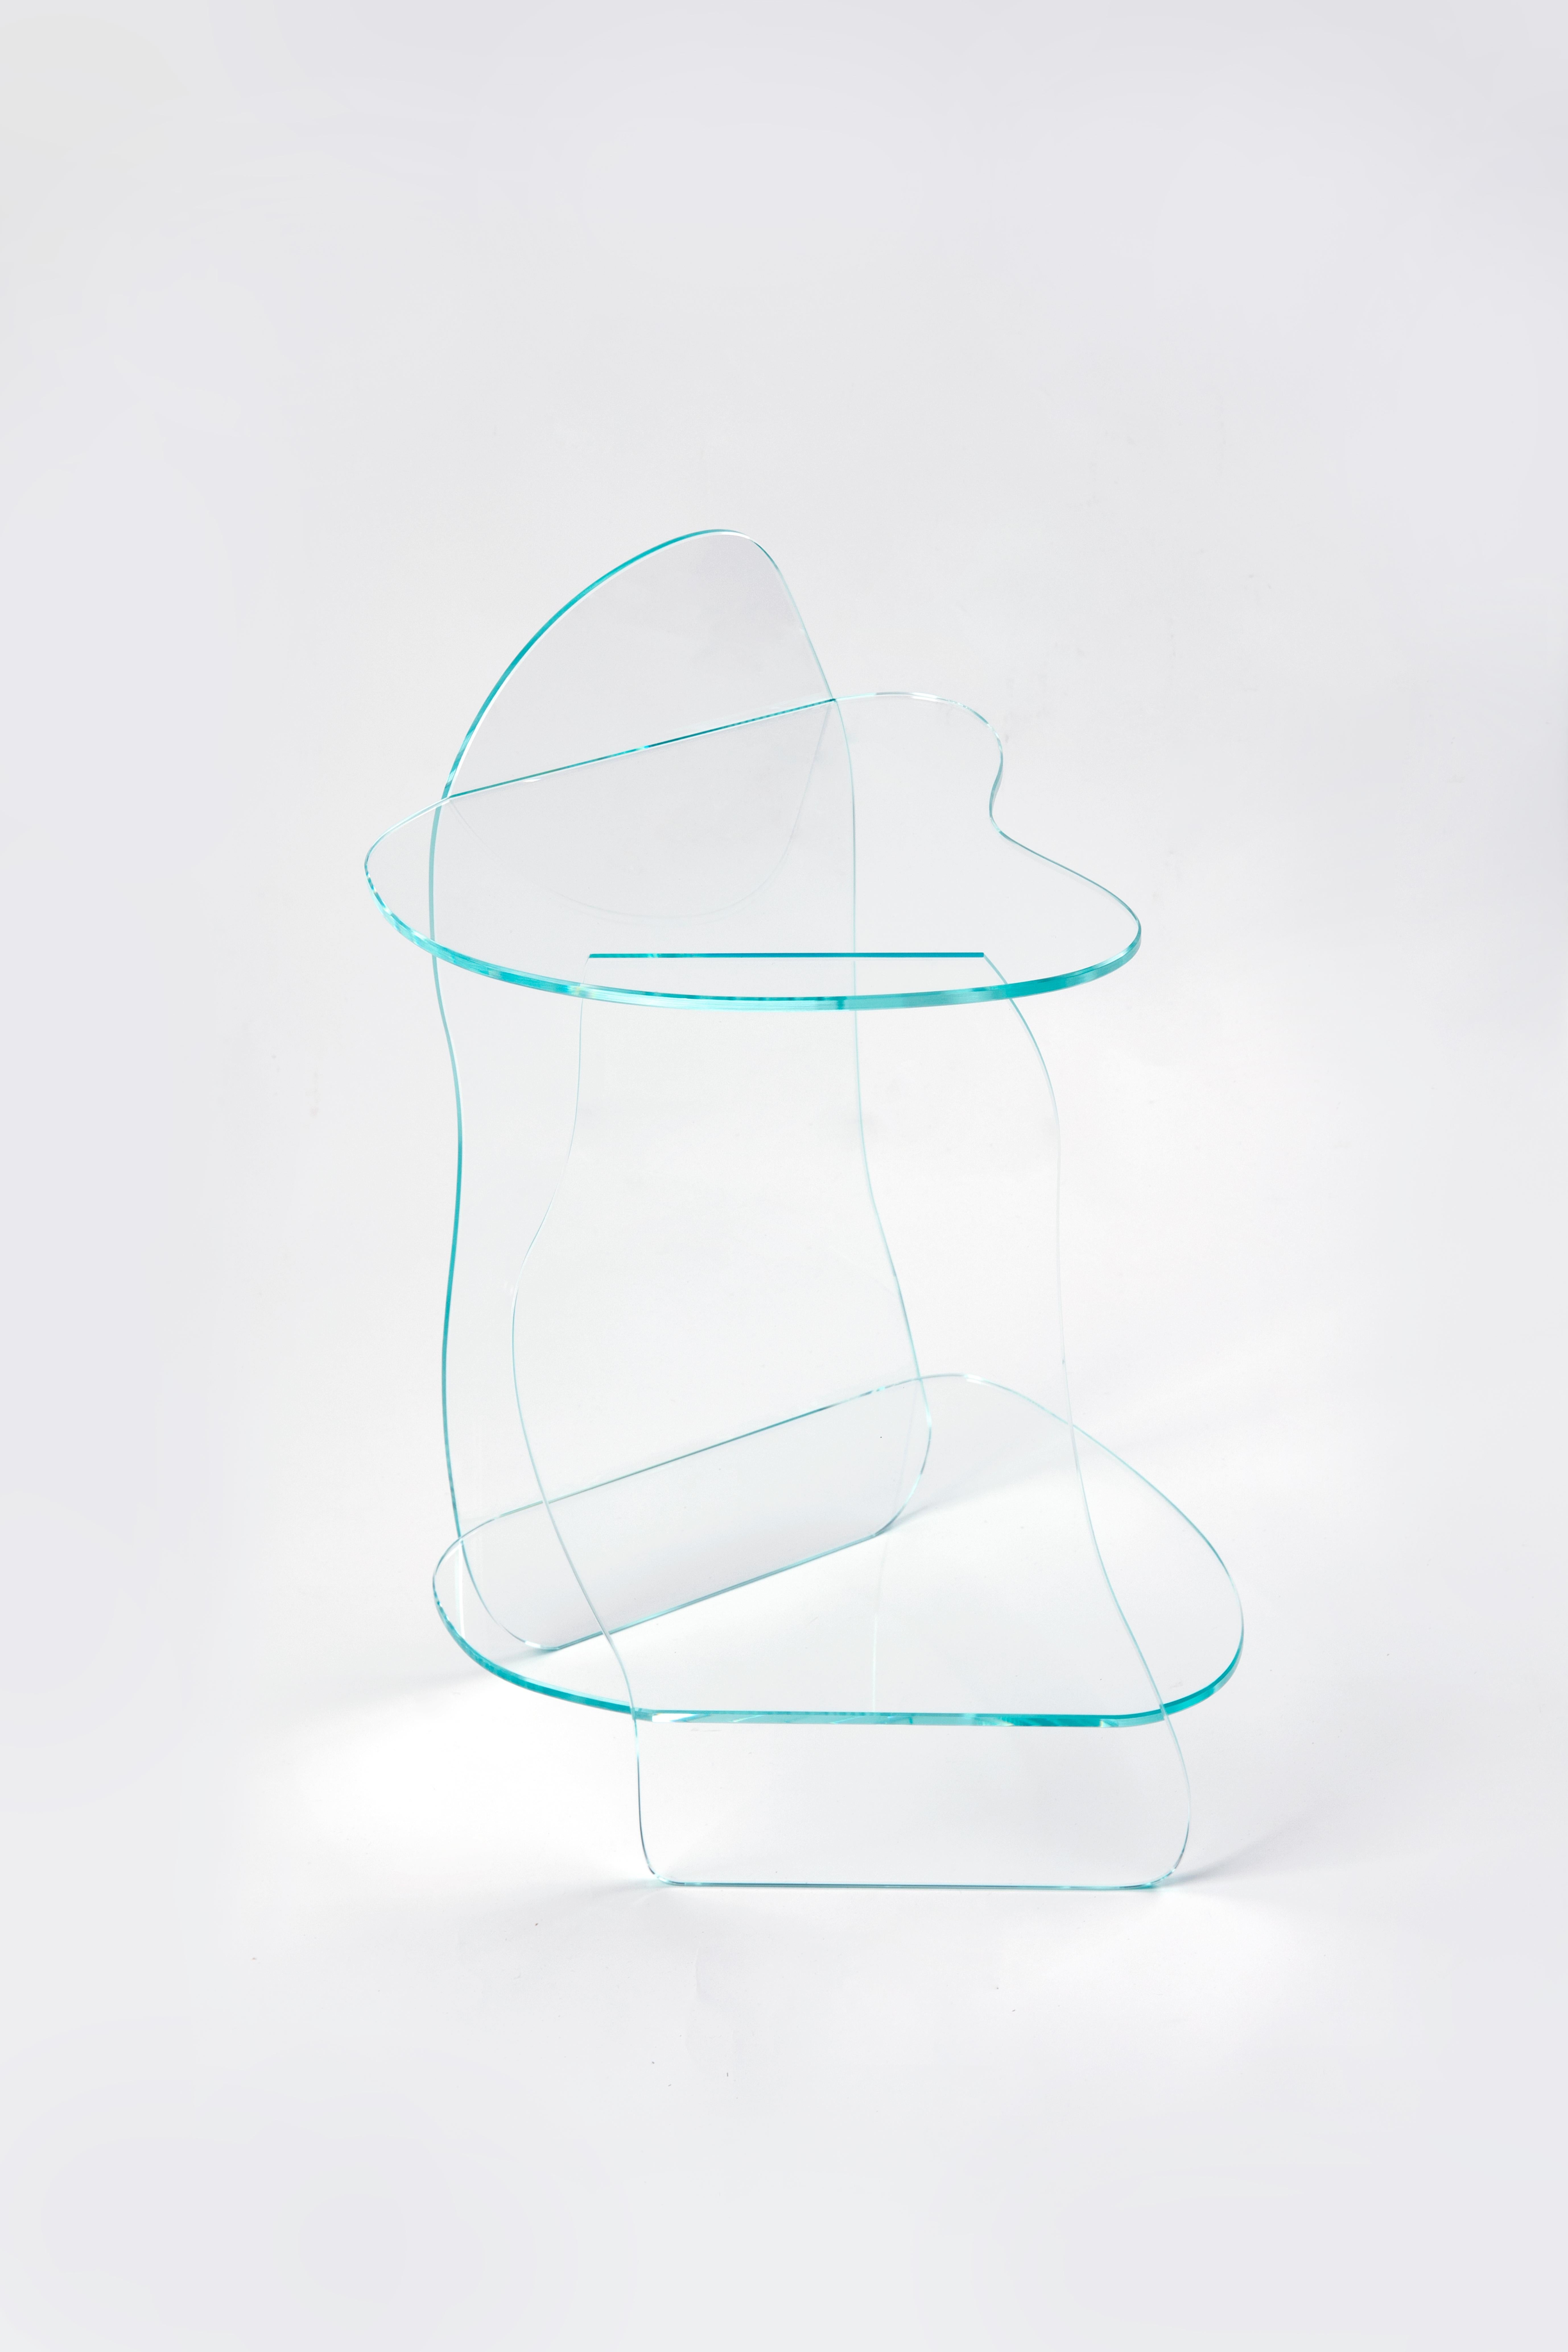 Dolmen clear glass side table sculpted by Studio-Chacha
Dimensions: 37 x 38 x 66 cm
Materials: Glass

Studio-Chacha is a high-end art furniture studio founded in 2017 that creates a new aesthetic with an unfamiliar combination of familiar